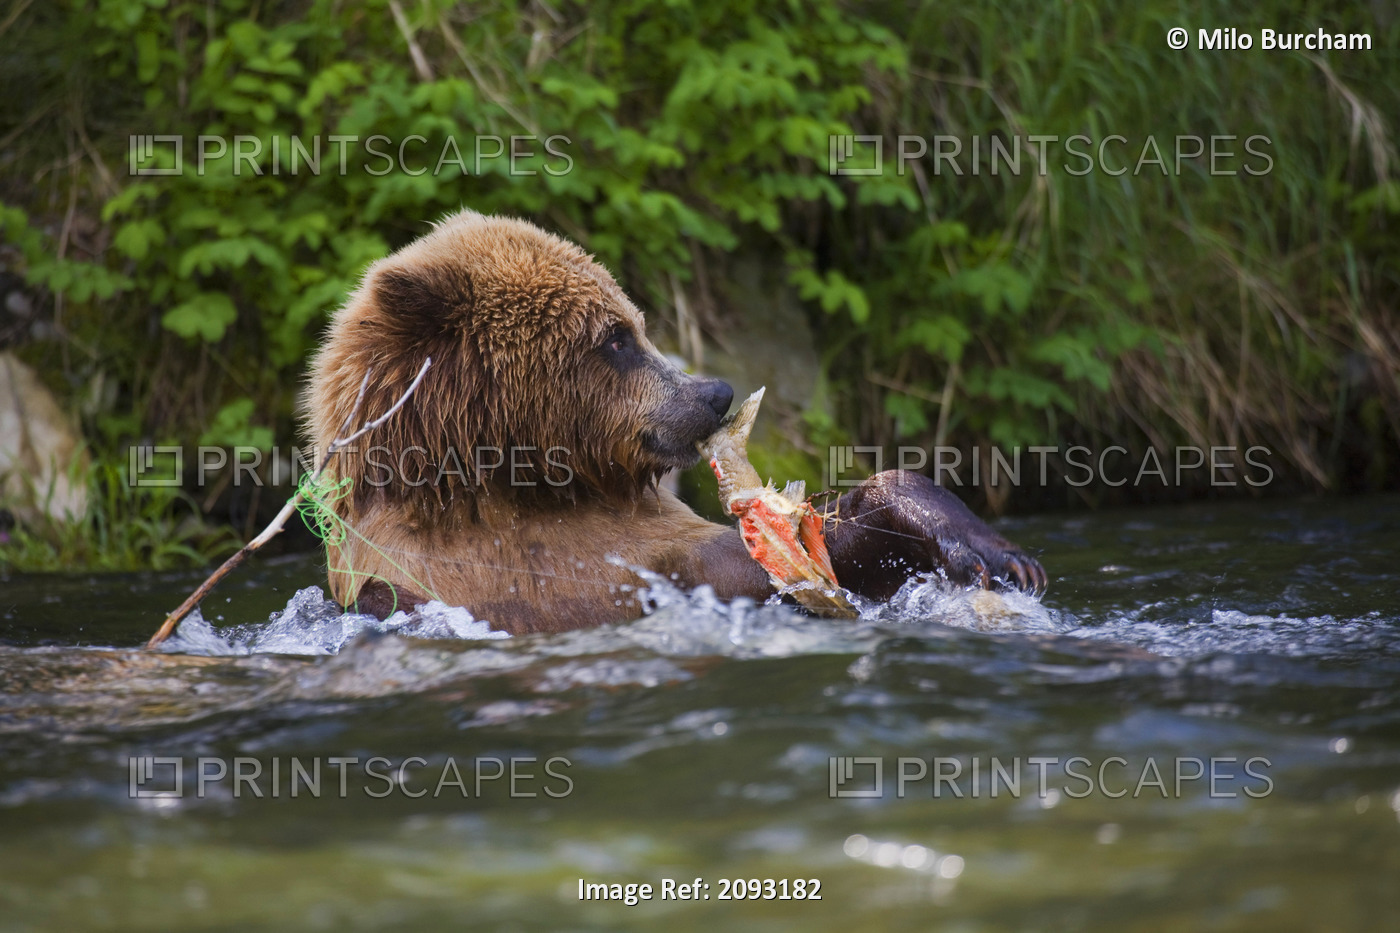 View Of A Brown Bear Eating A Salmon Carcass From A Tangled Fishing Line In The ...